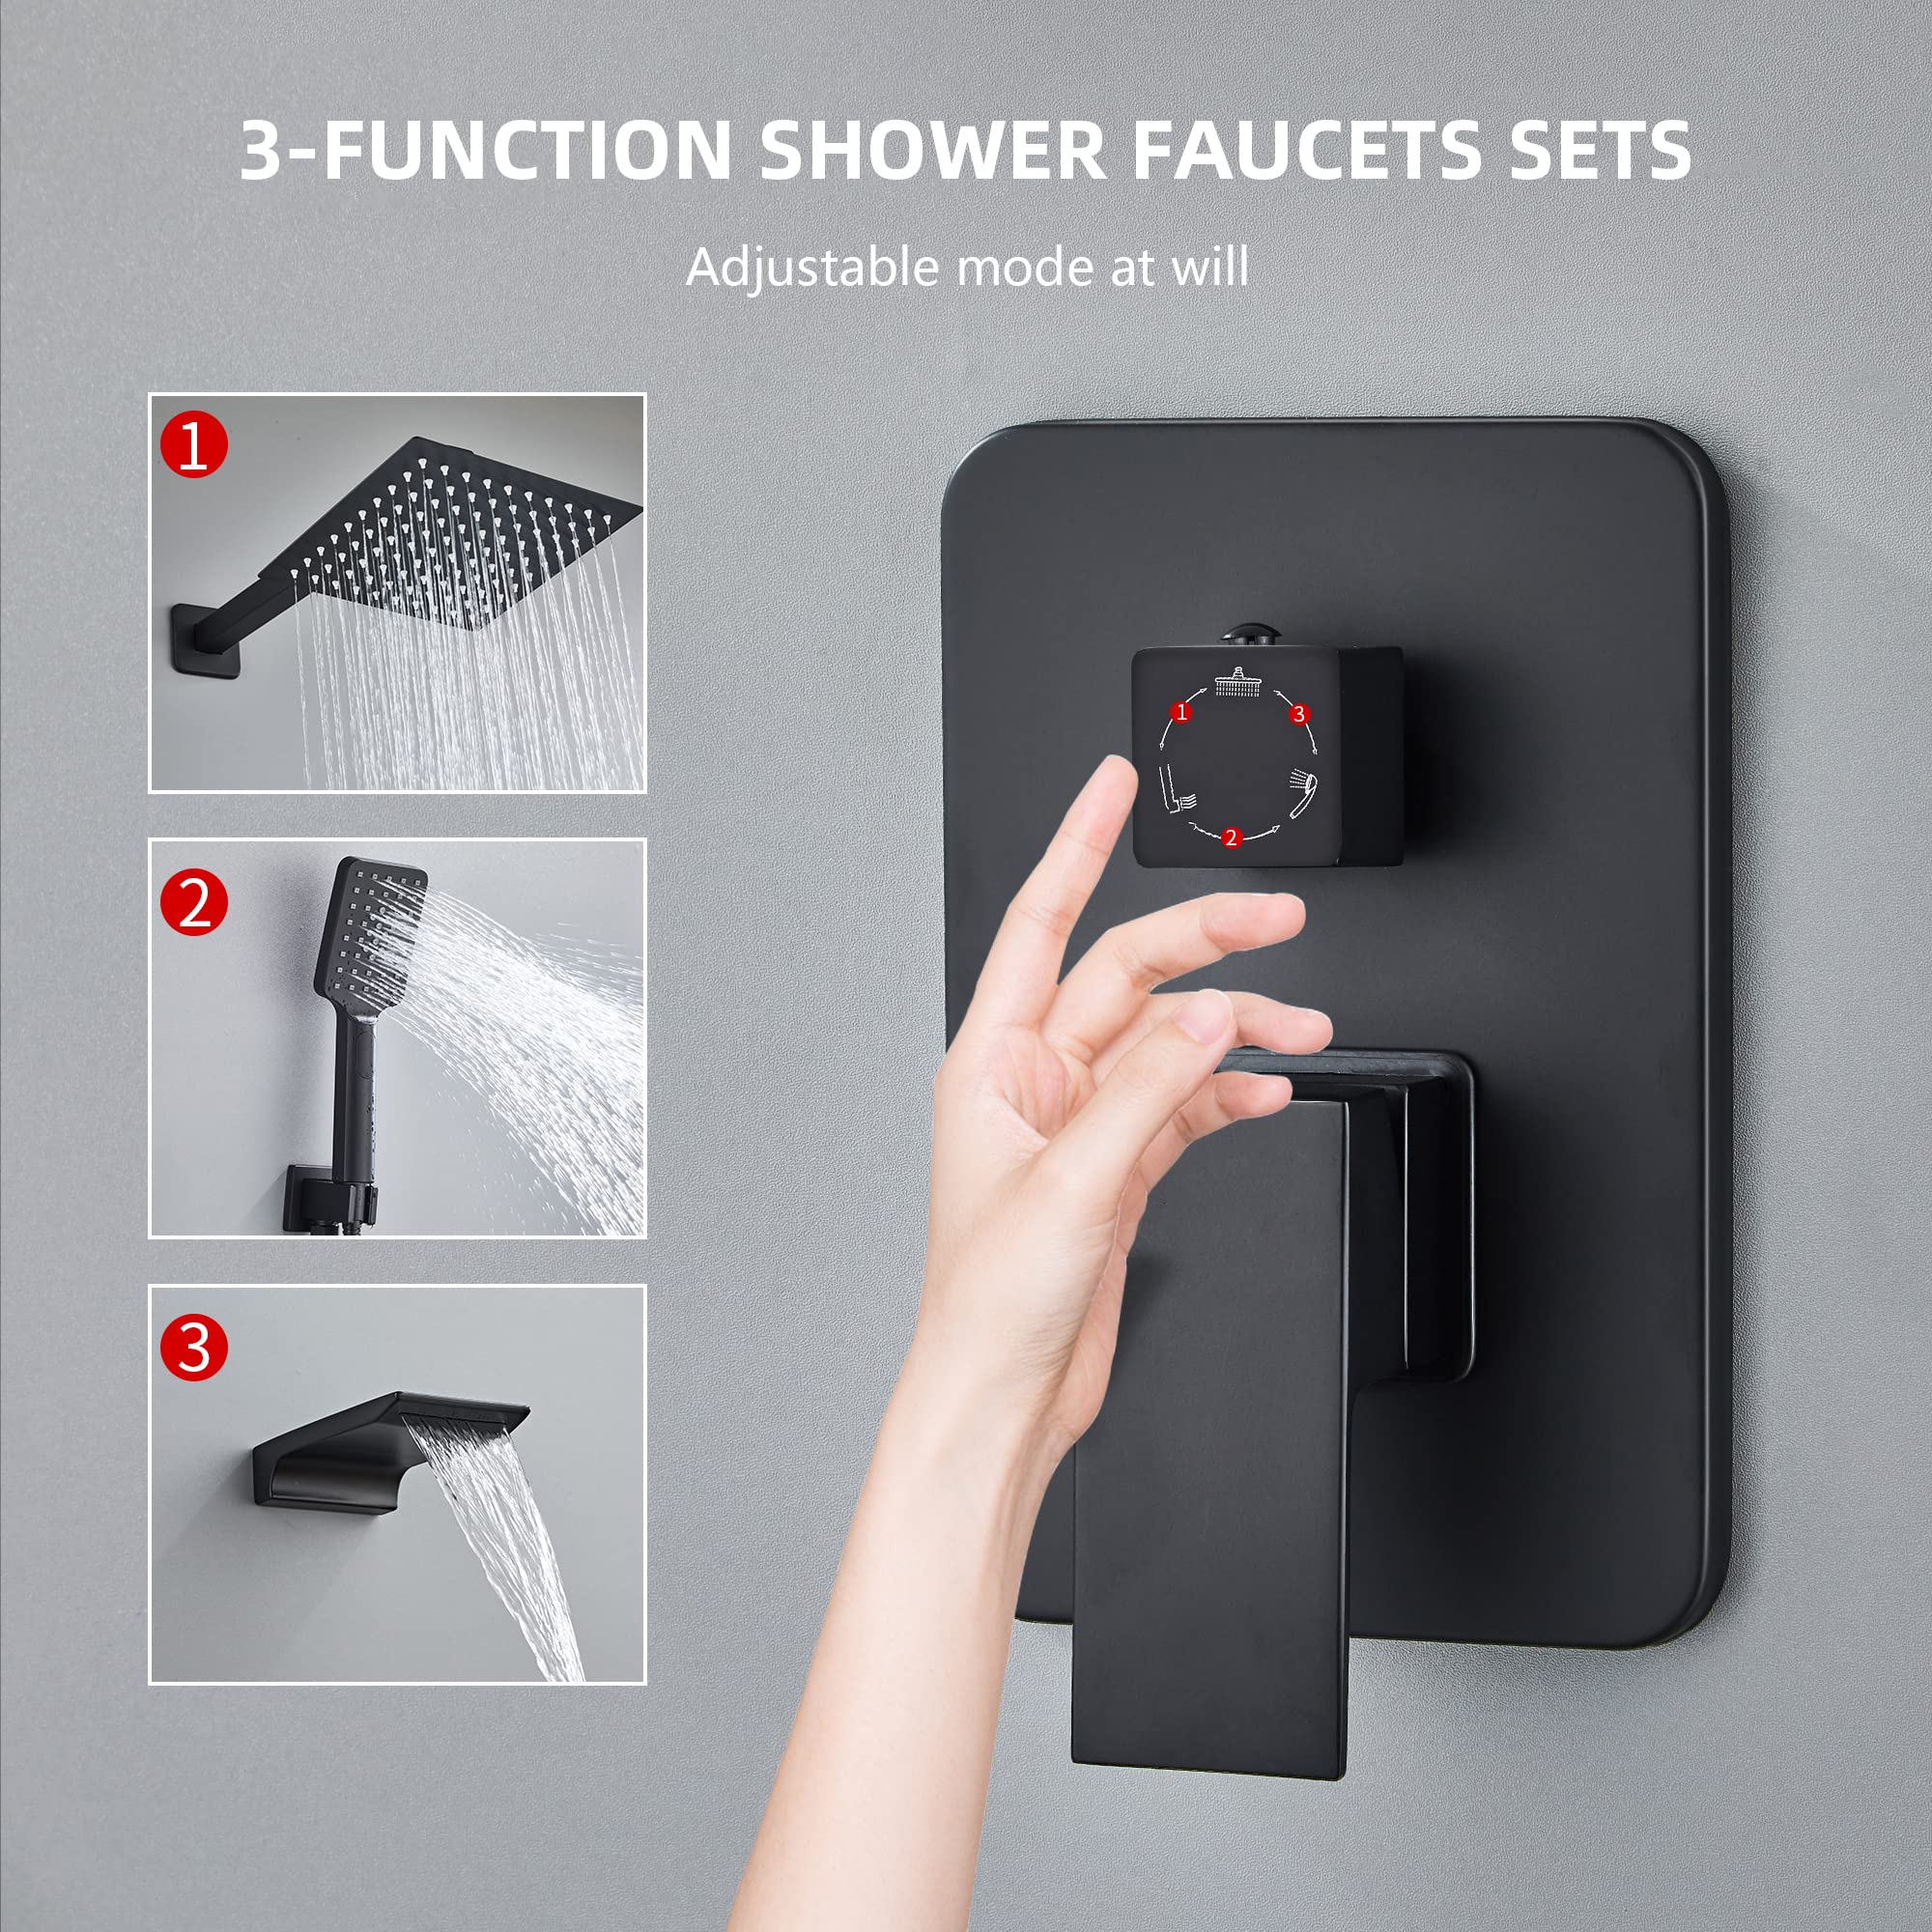 LCEVCGK Shower Faucet Set Complete Matte Black Shower System with 10 inch Square Rainfall Shower Head 3-Function Handheld Shower Waterfall Bathtub Spout Rain Shower Combo Set Bathroom Wall Mounted